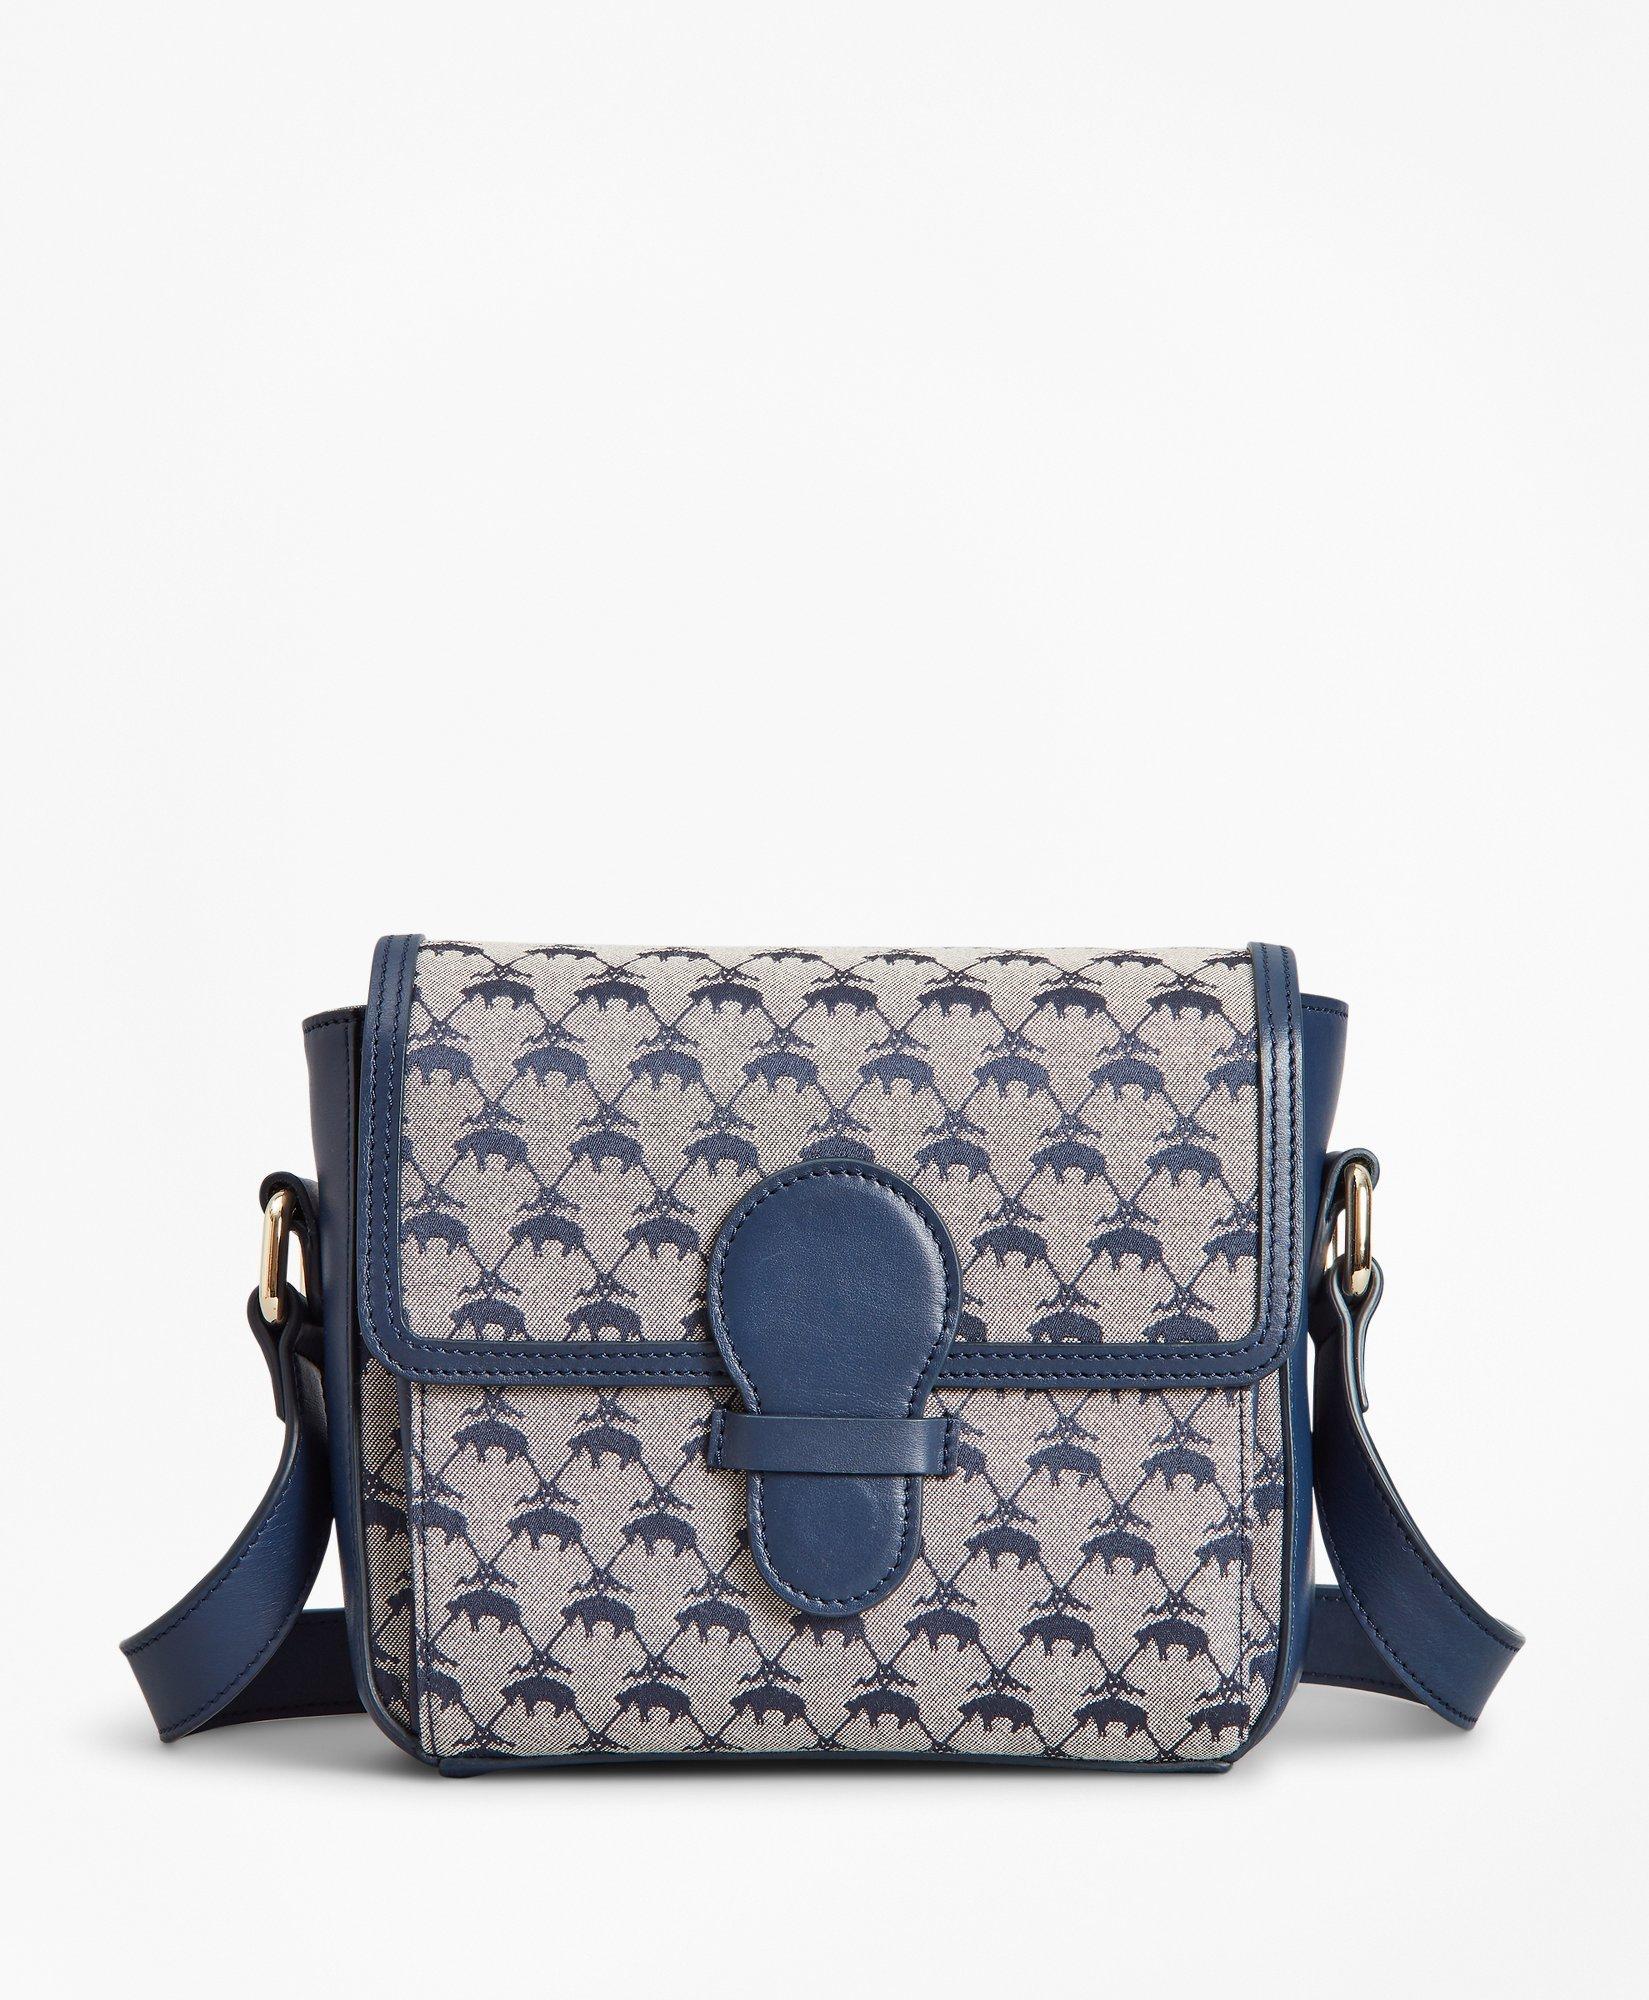 Brooks Brothers Small Quilted Calfskin Crossbody Bag, $398